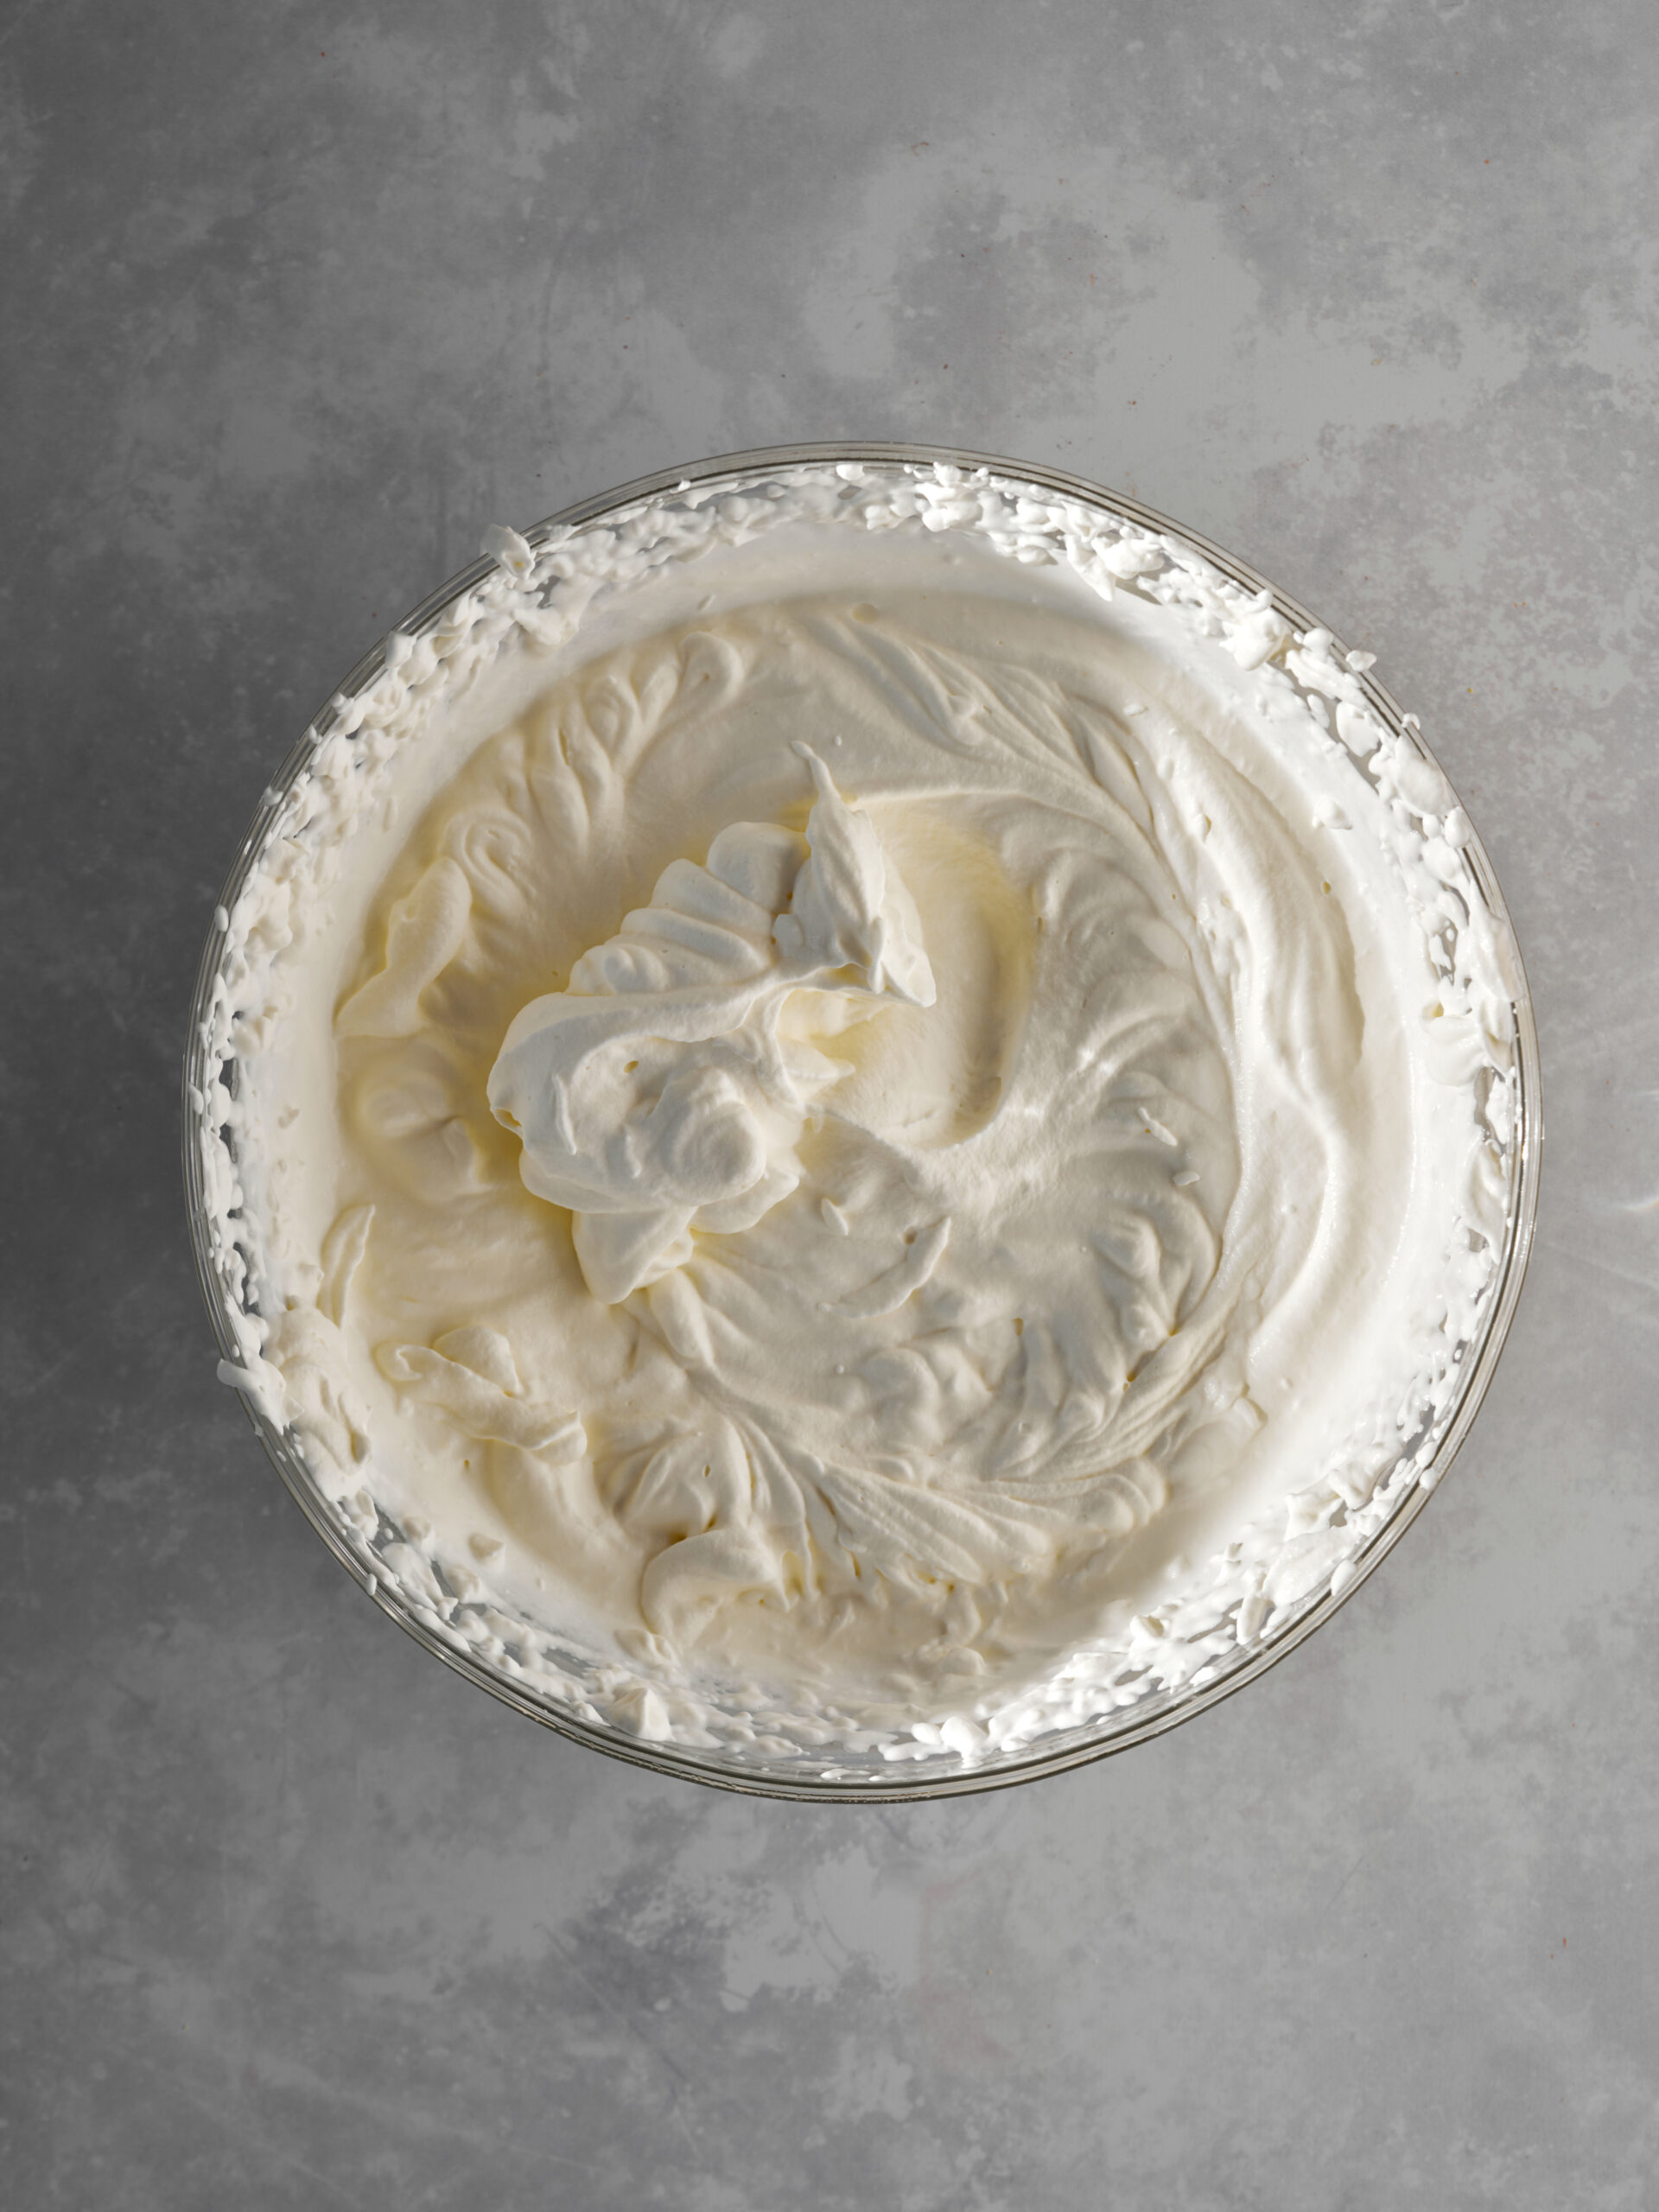 Whipped cream in a large glass bowl.